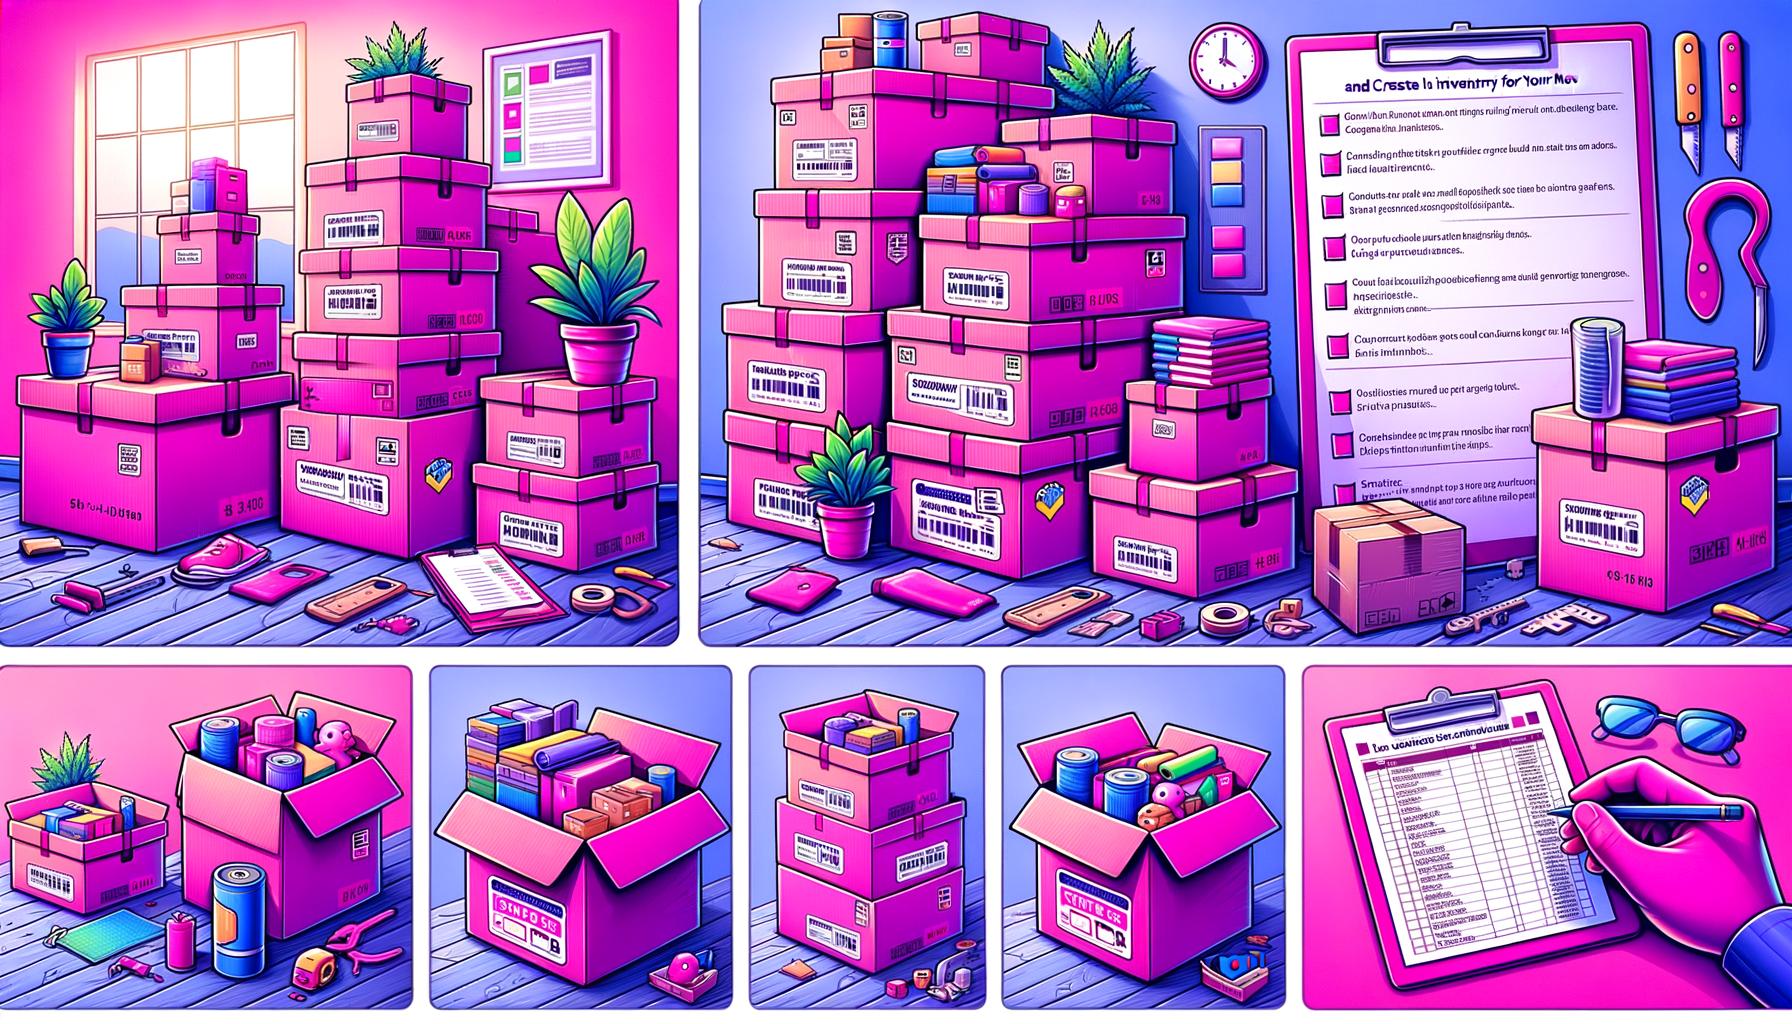 Illustration of fuschia colored cartoon boxes with labels representing the blog post "How to Label Boxes and Create an Inventory for Your Move" on MovingExperts.